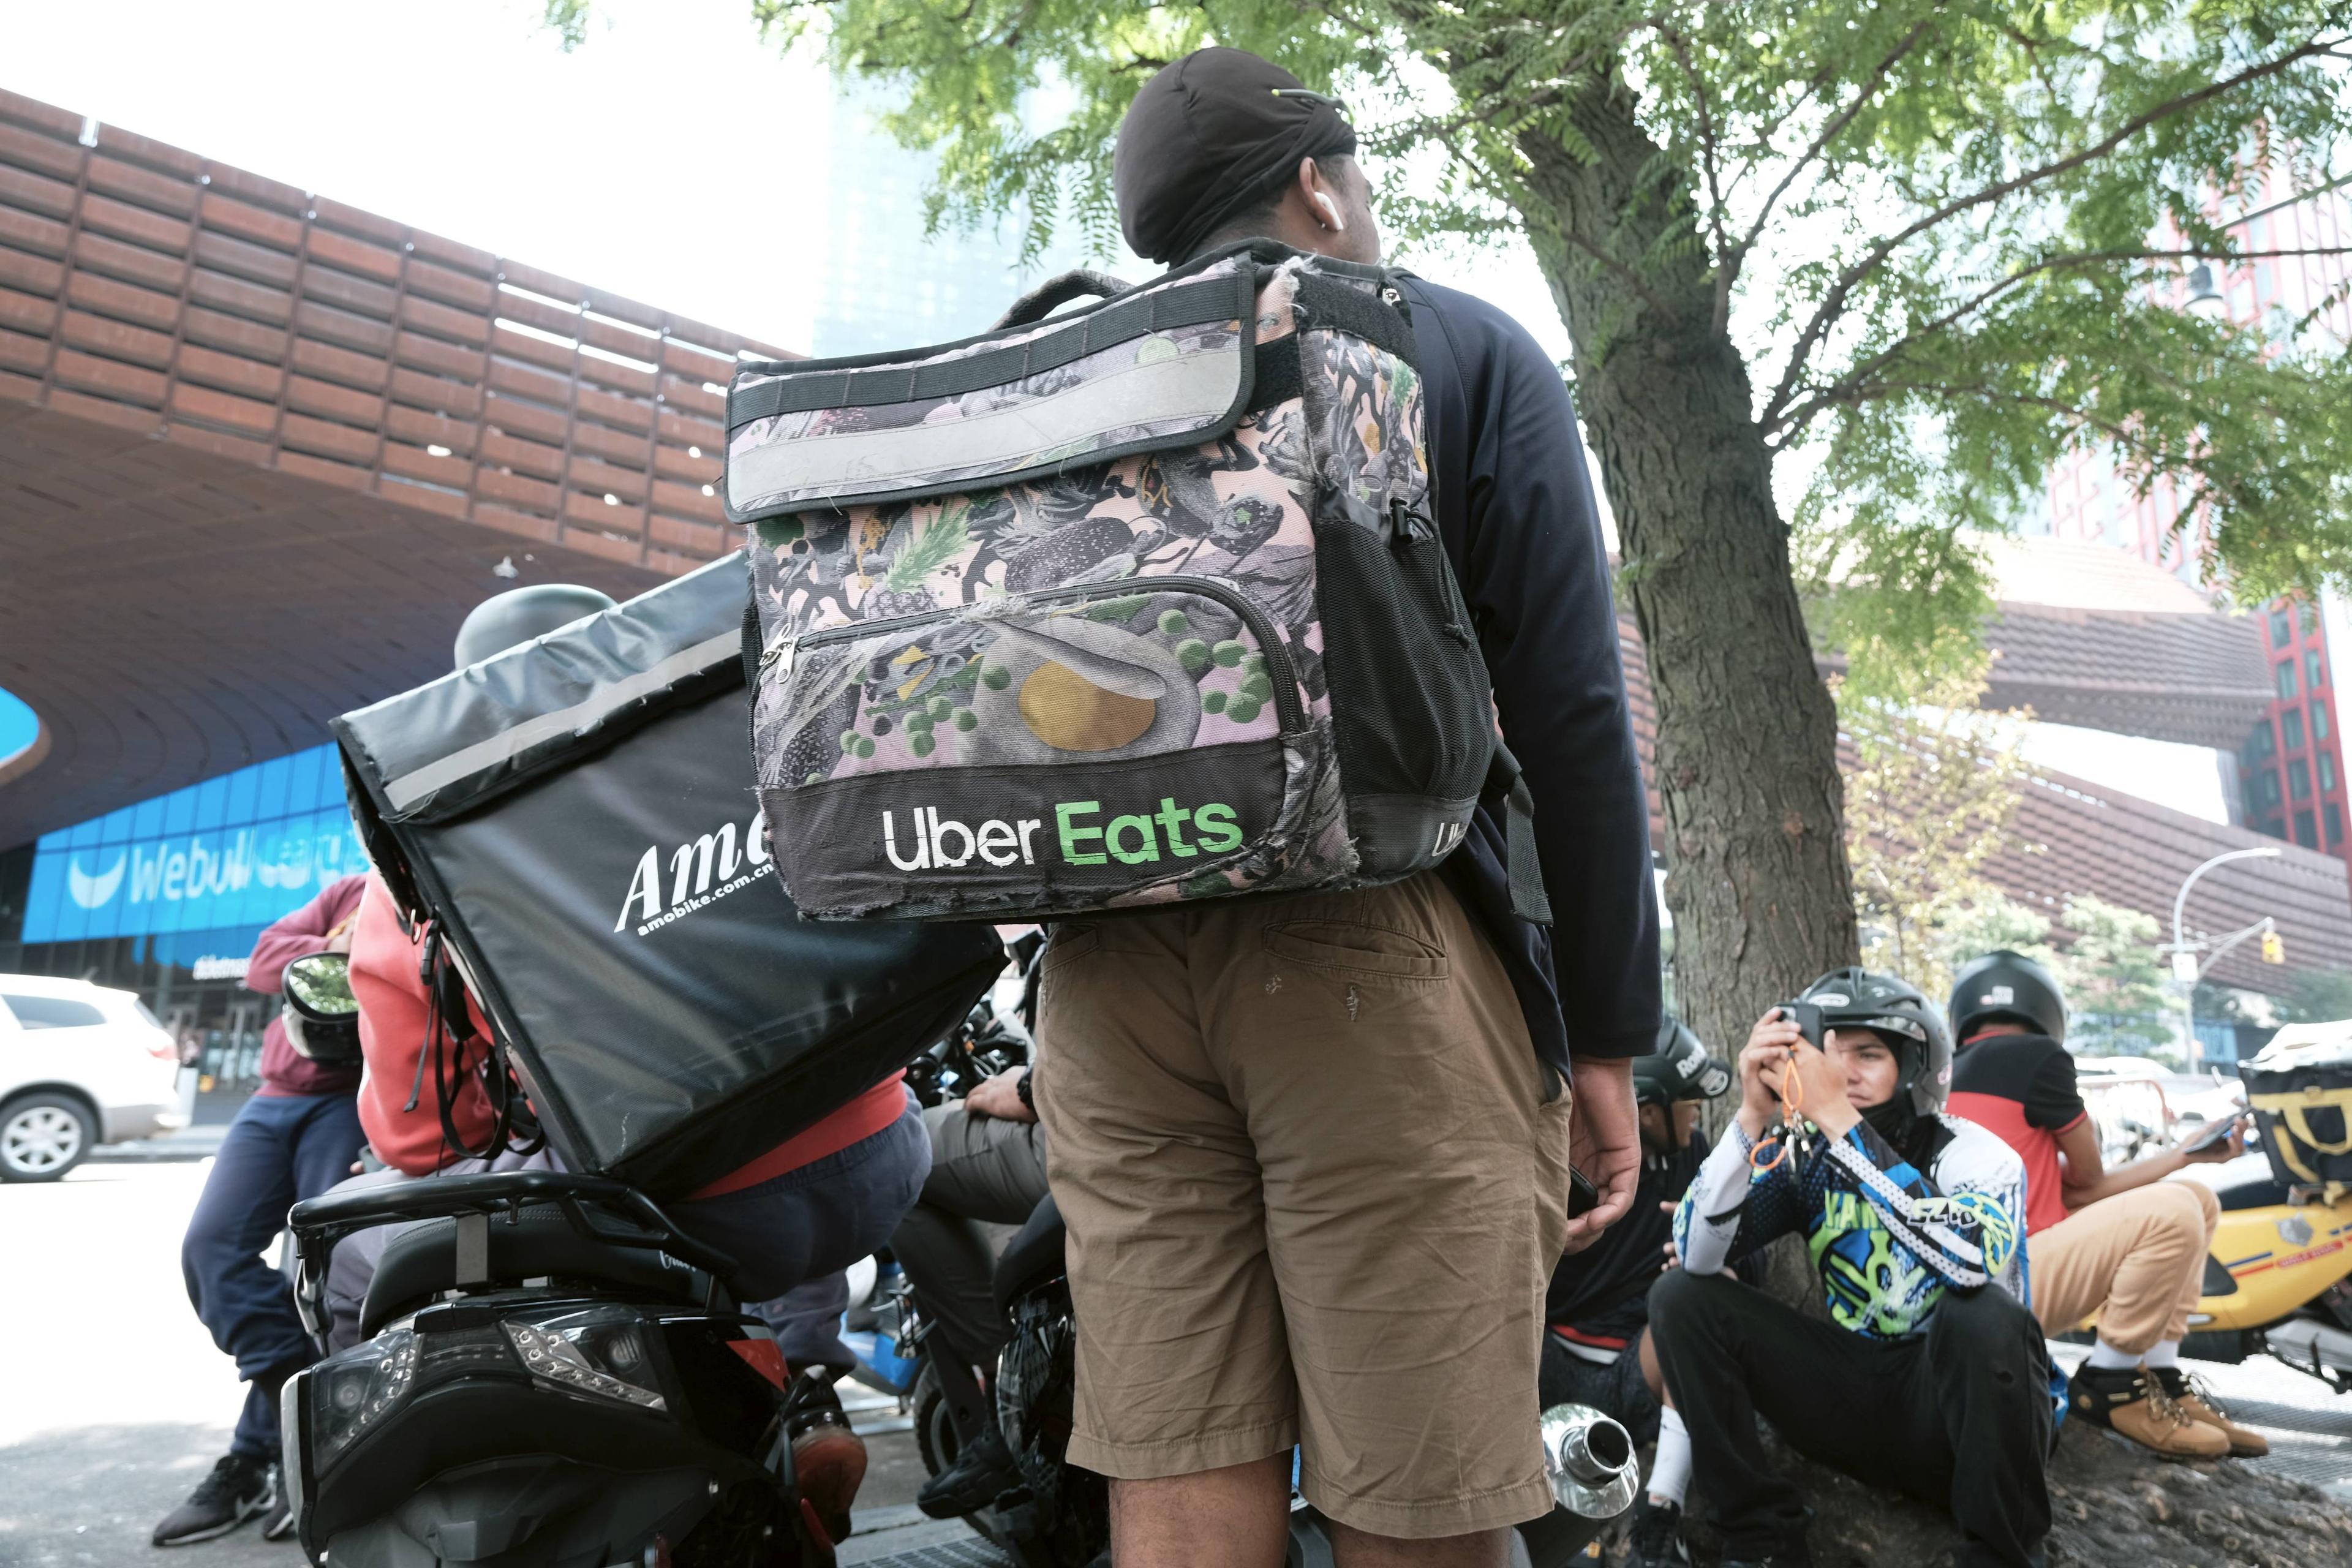 California Bill Requires Disclosure of Hidden Fees From Food Delivery Apps